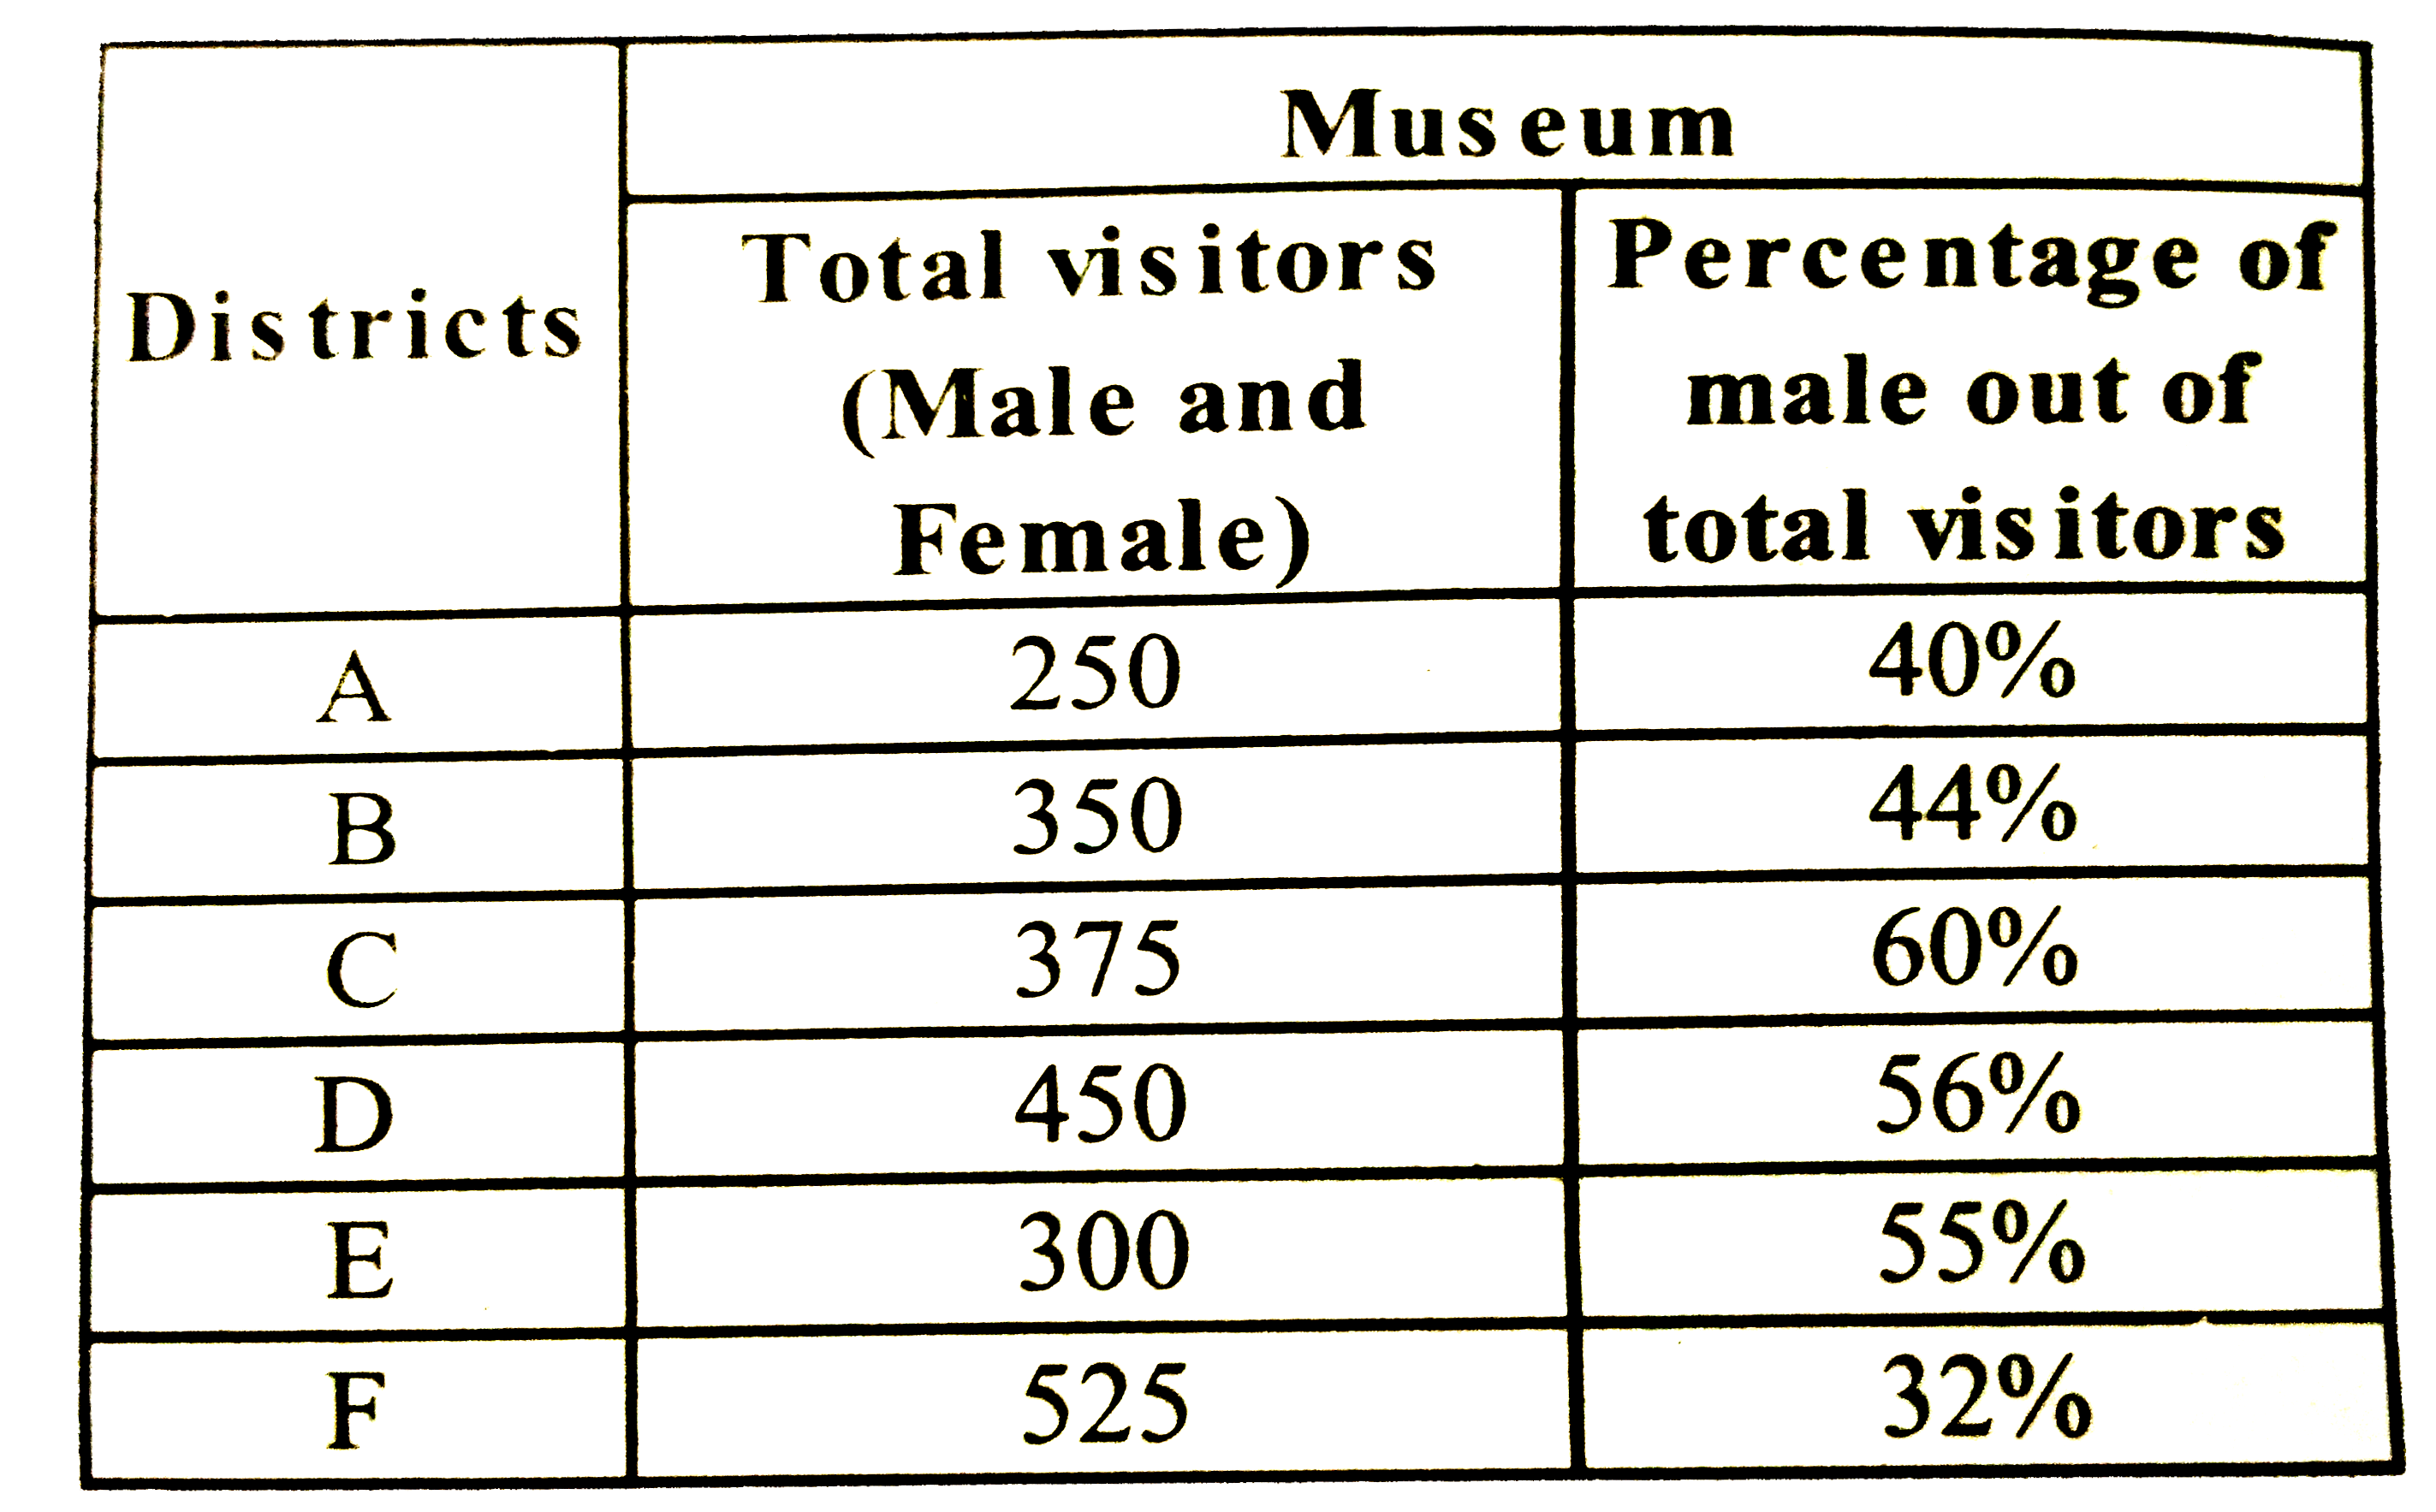 Total number of visitors and Percentage of male and out of these visitors are give       Find the ratio of the male visitors from district E and F together to see the museum to the female visitors form district C and D together to see the museum ?